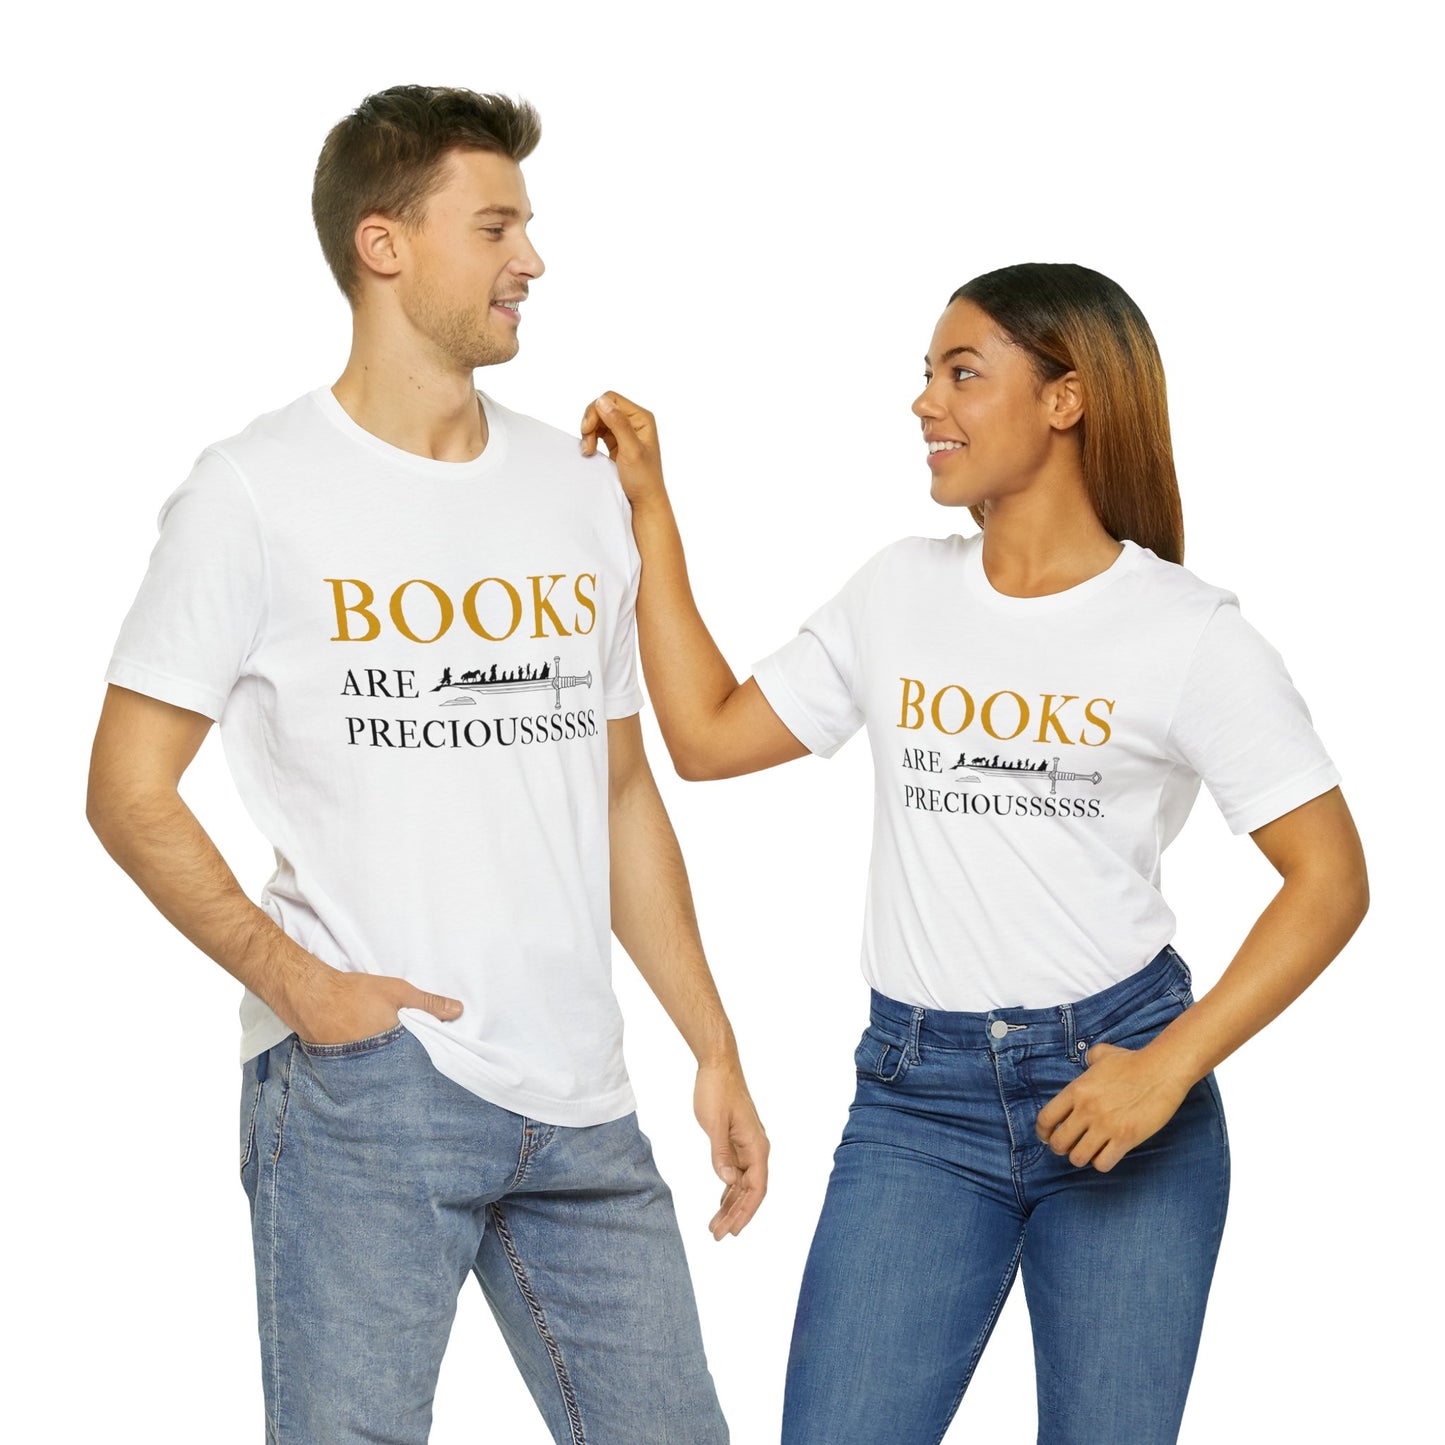 Books Are Preciousssss T-Shirt - Book Lovers